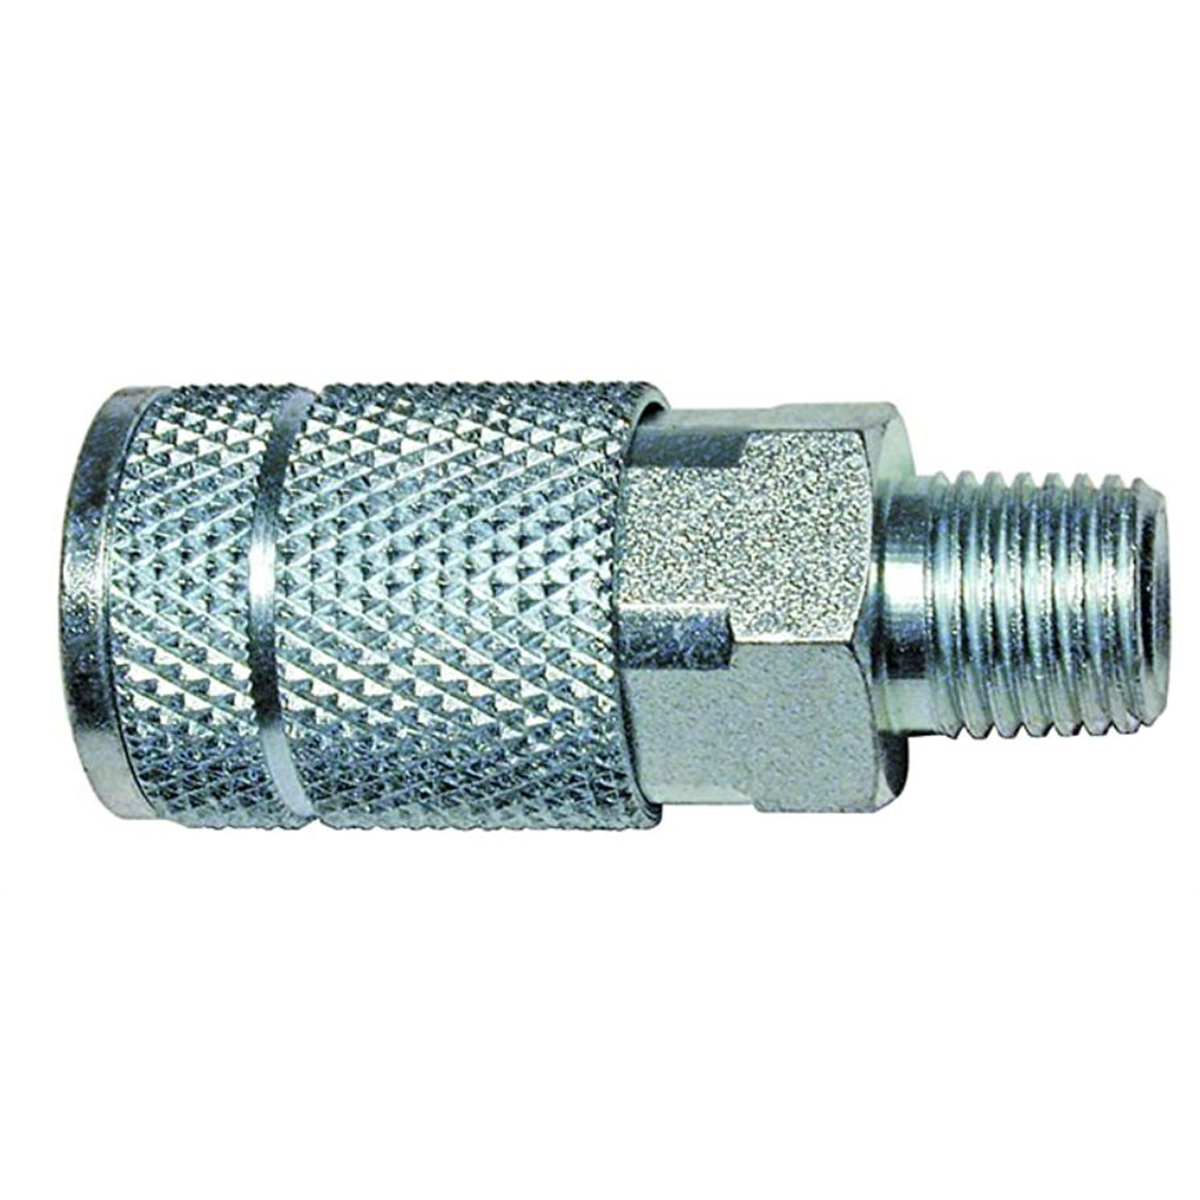 1/4 " Coupler 1/4" Male Threads Automotive T Style- Pack of 10